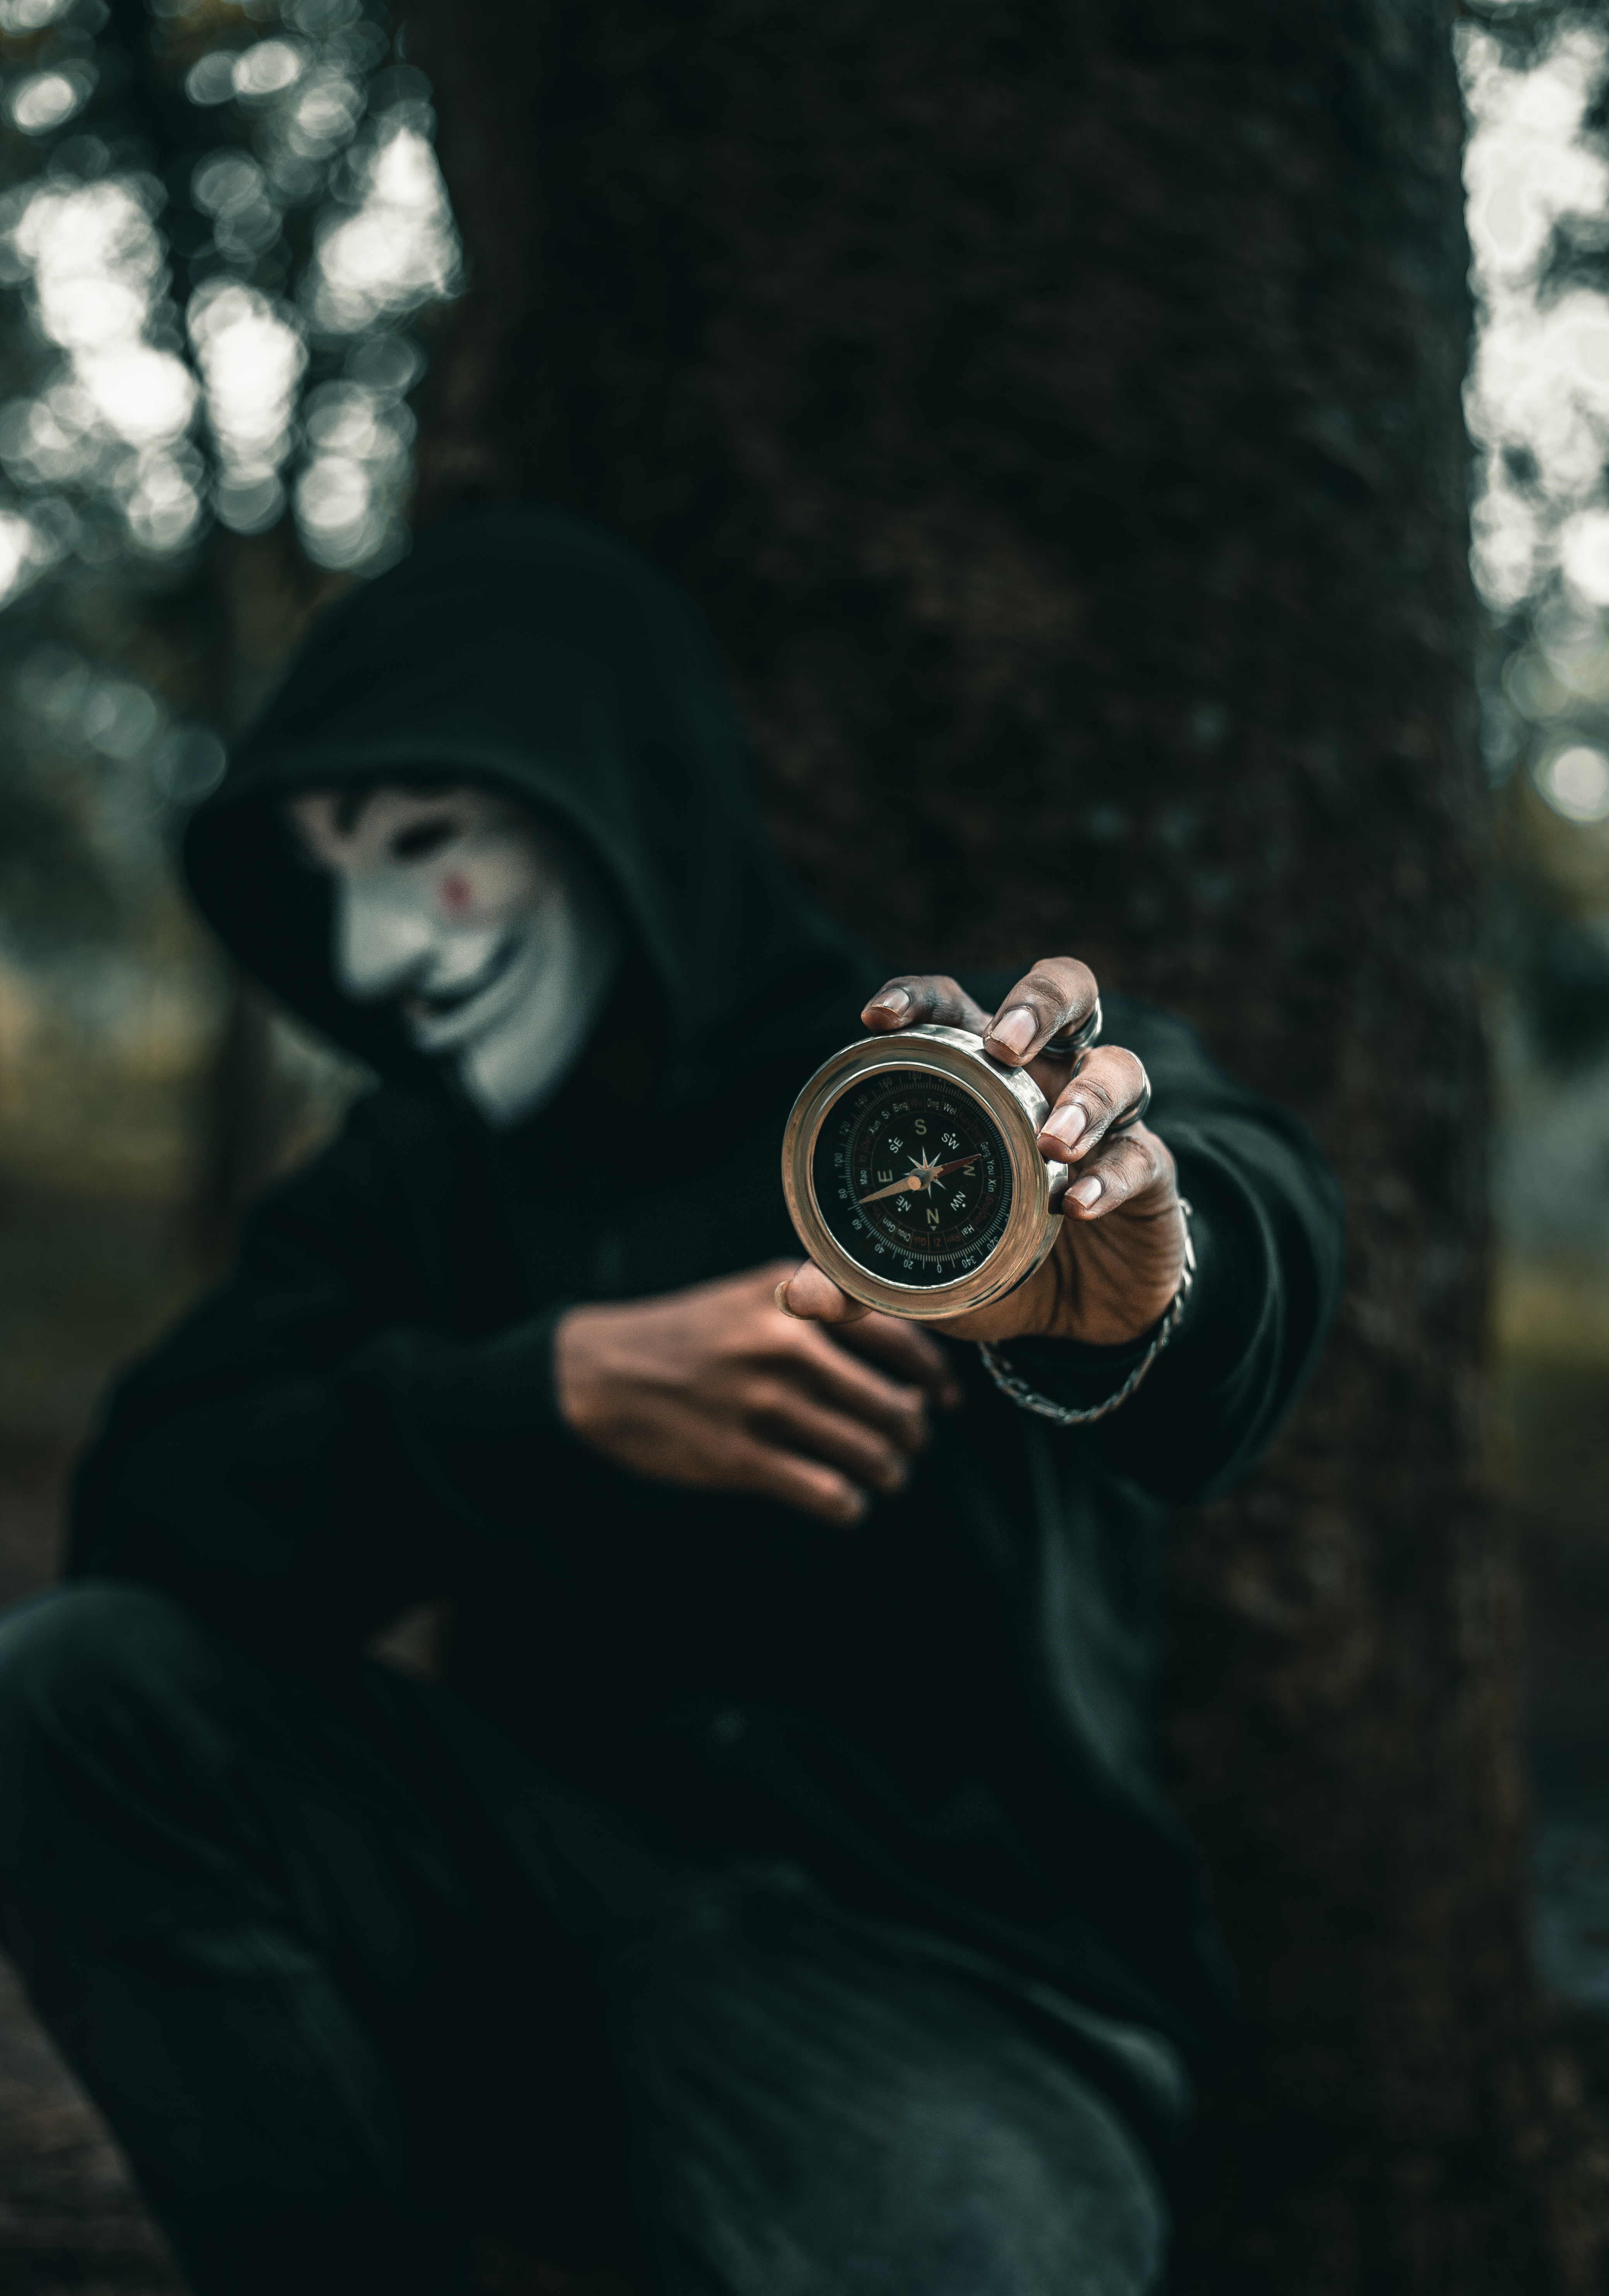 New Lock Screen Wallpapers anonymous, miscellanea, miscellaneous, mask, human, person, hood, compass